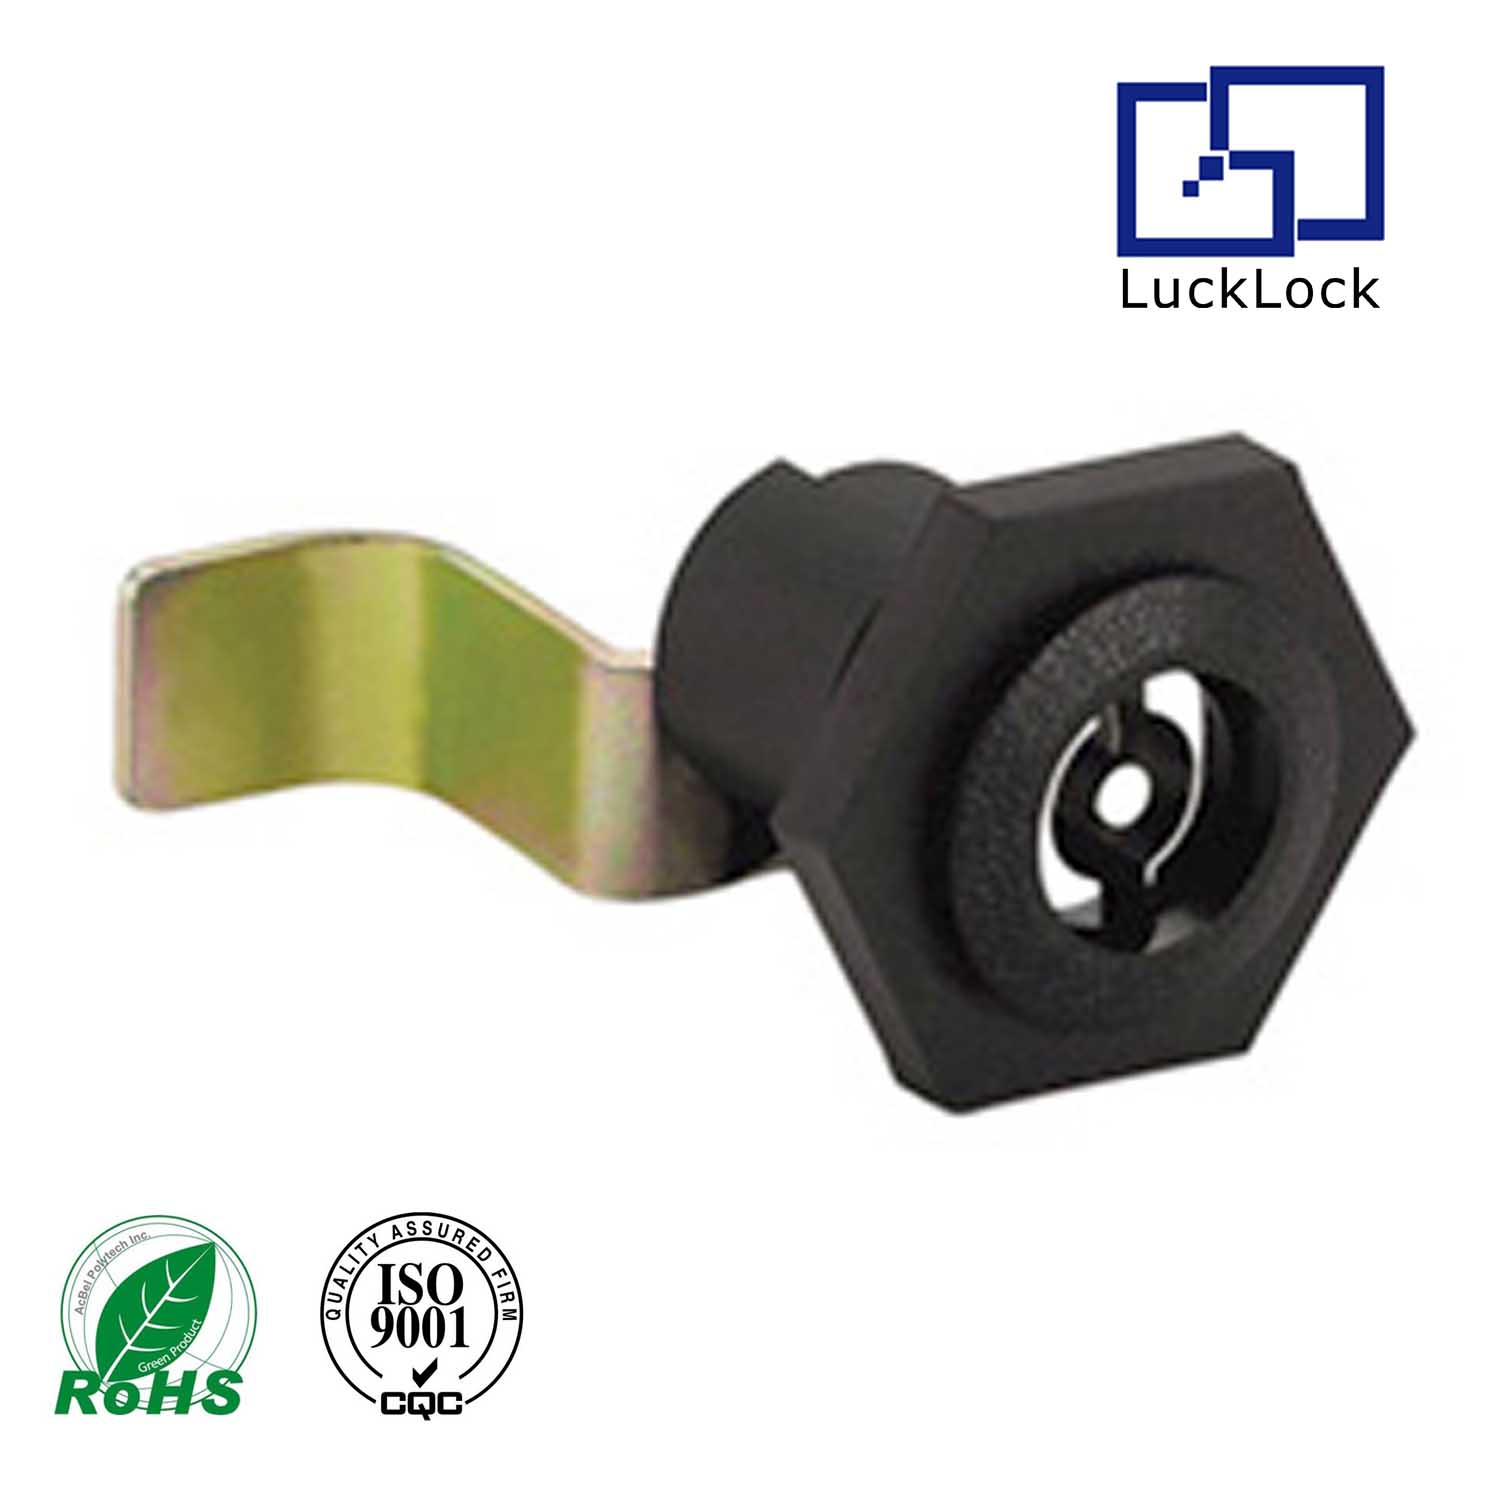 Fs1278 Abs Material Key Insert Cam Lock For Mail Boxes Lock Post